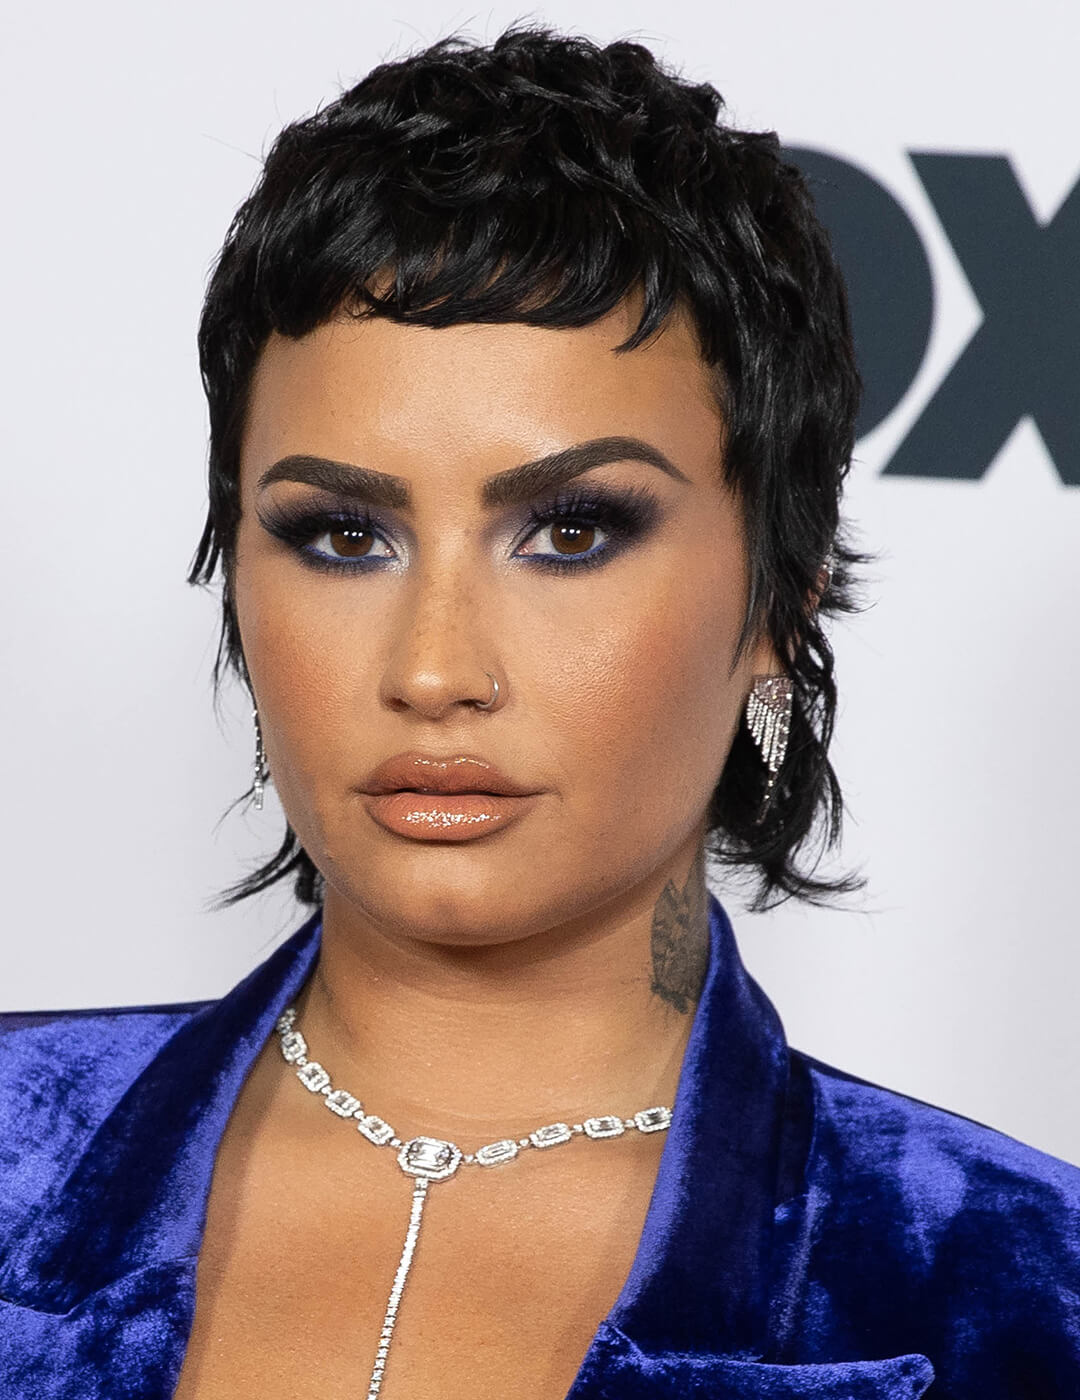 Demi Lovato in a short mullet, blue suede suit, and smoky eye makeup look